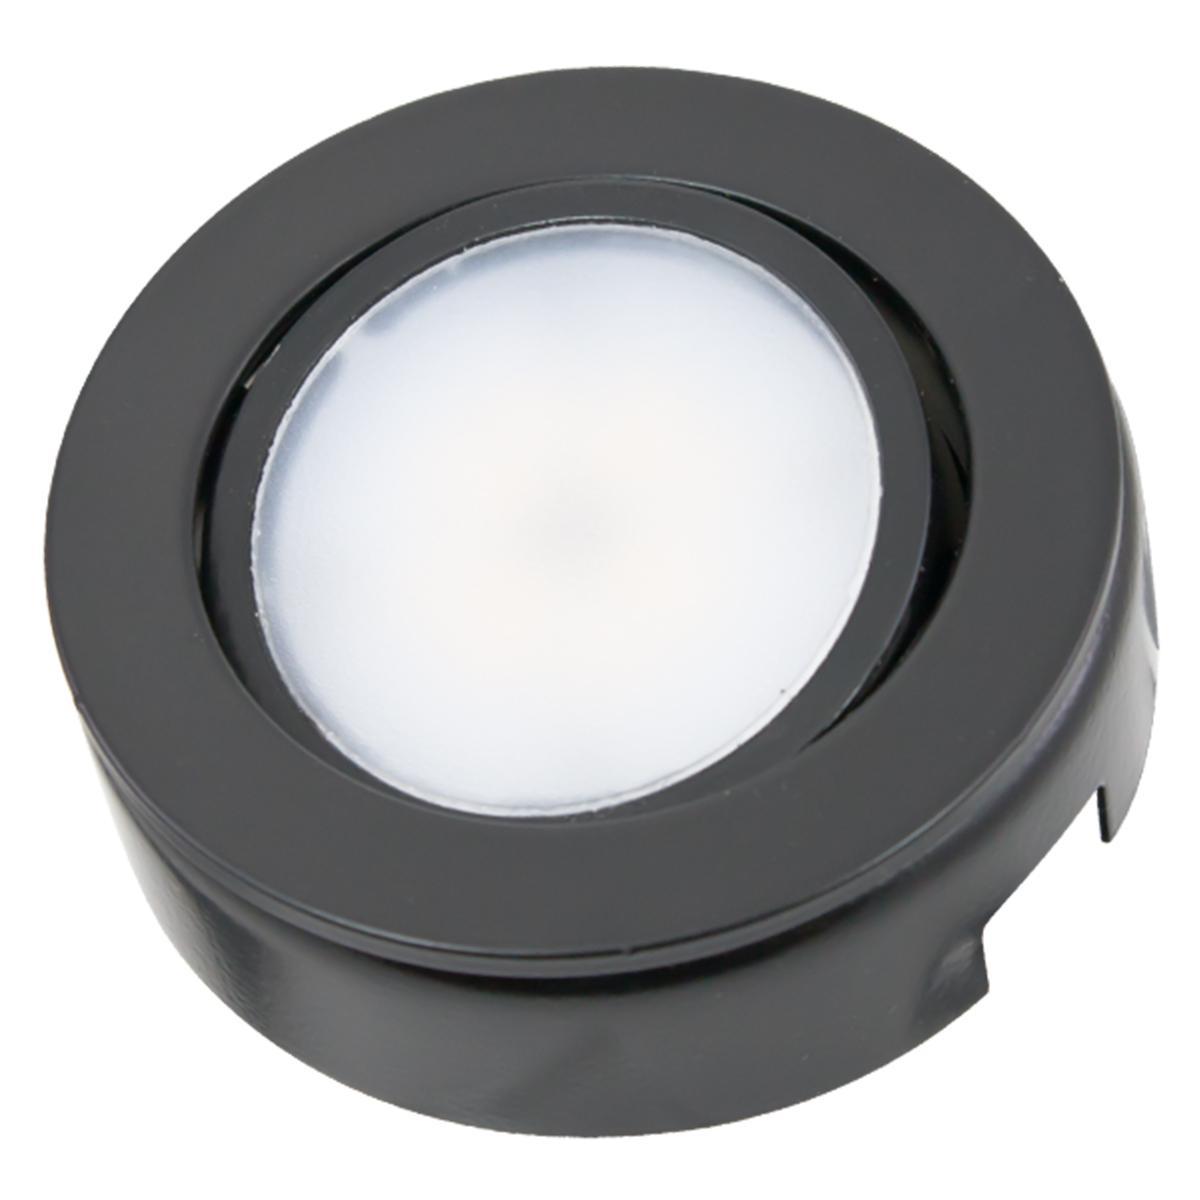 MVP LED Puck Light with Lead and Tail wires, 4.3 Watts, 2700K, 120V, Black - Bees Lighting